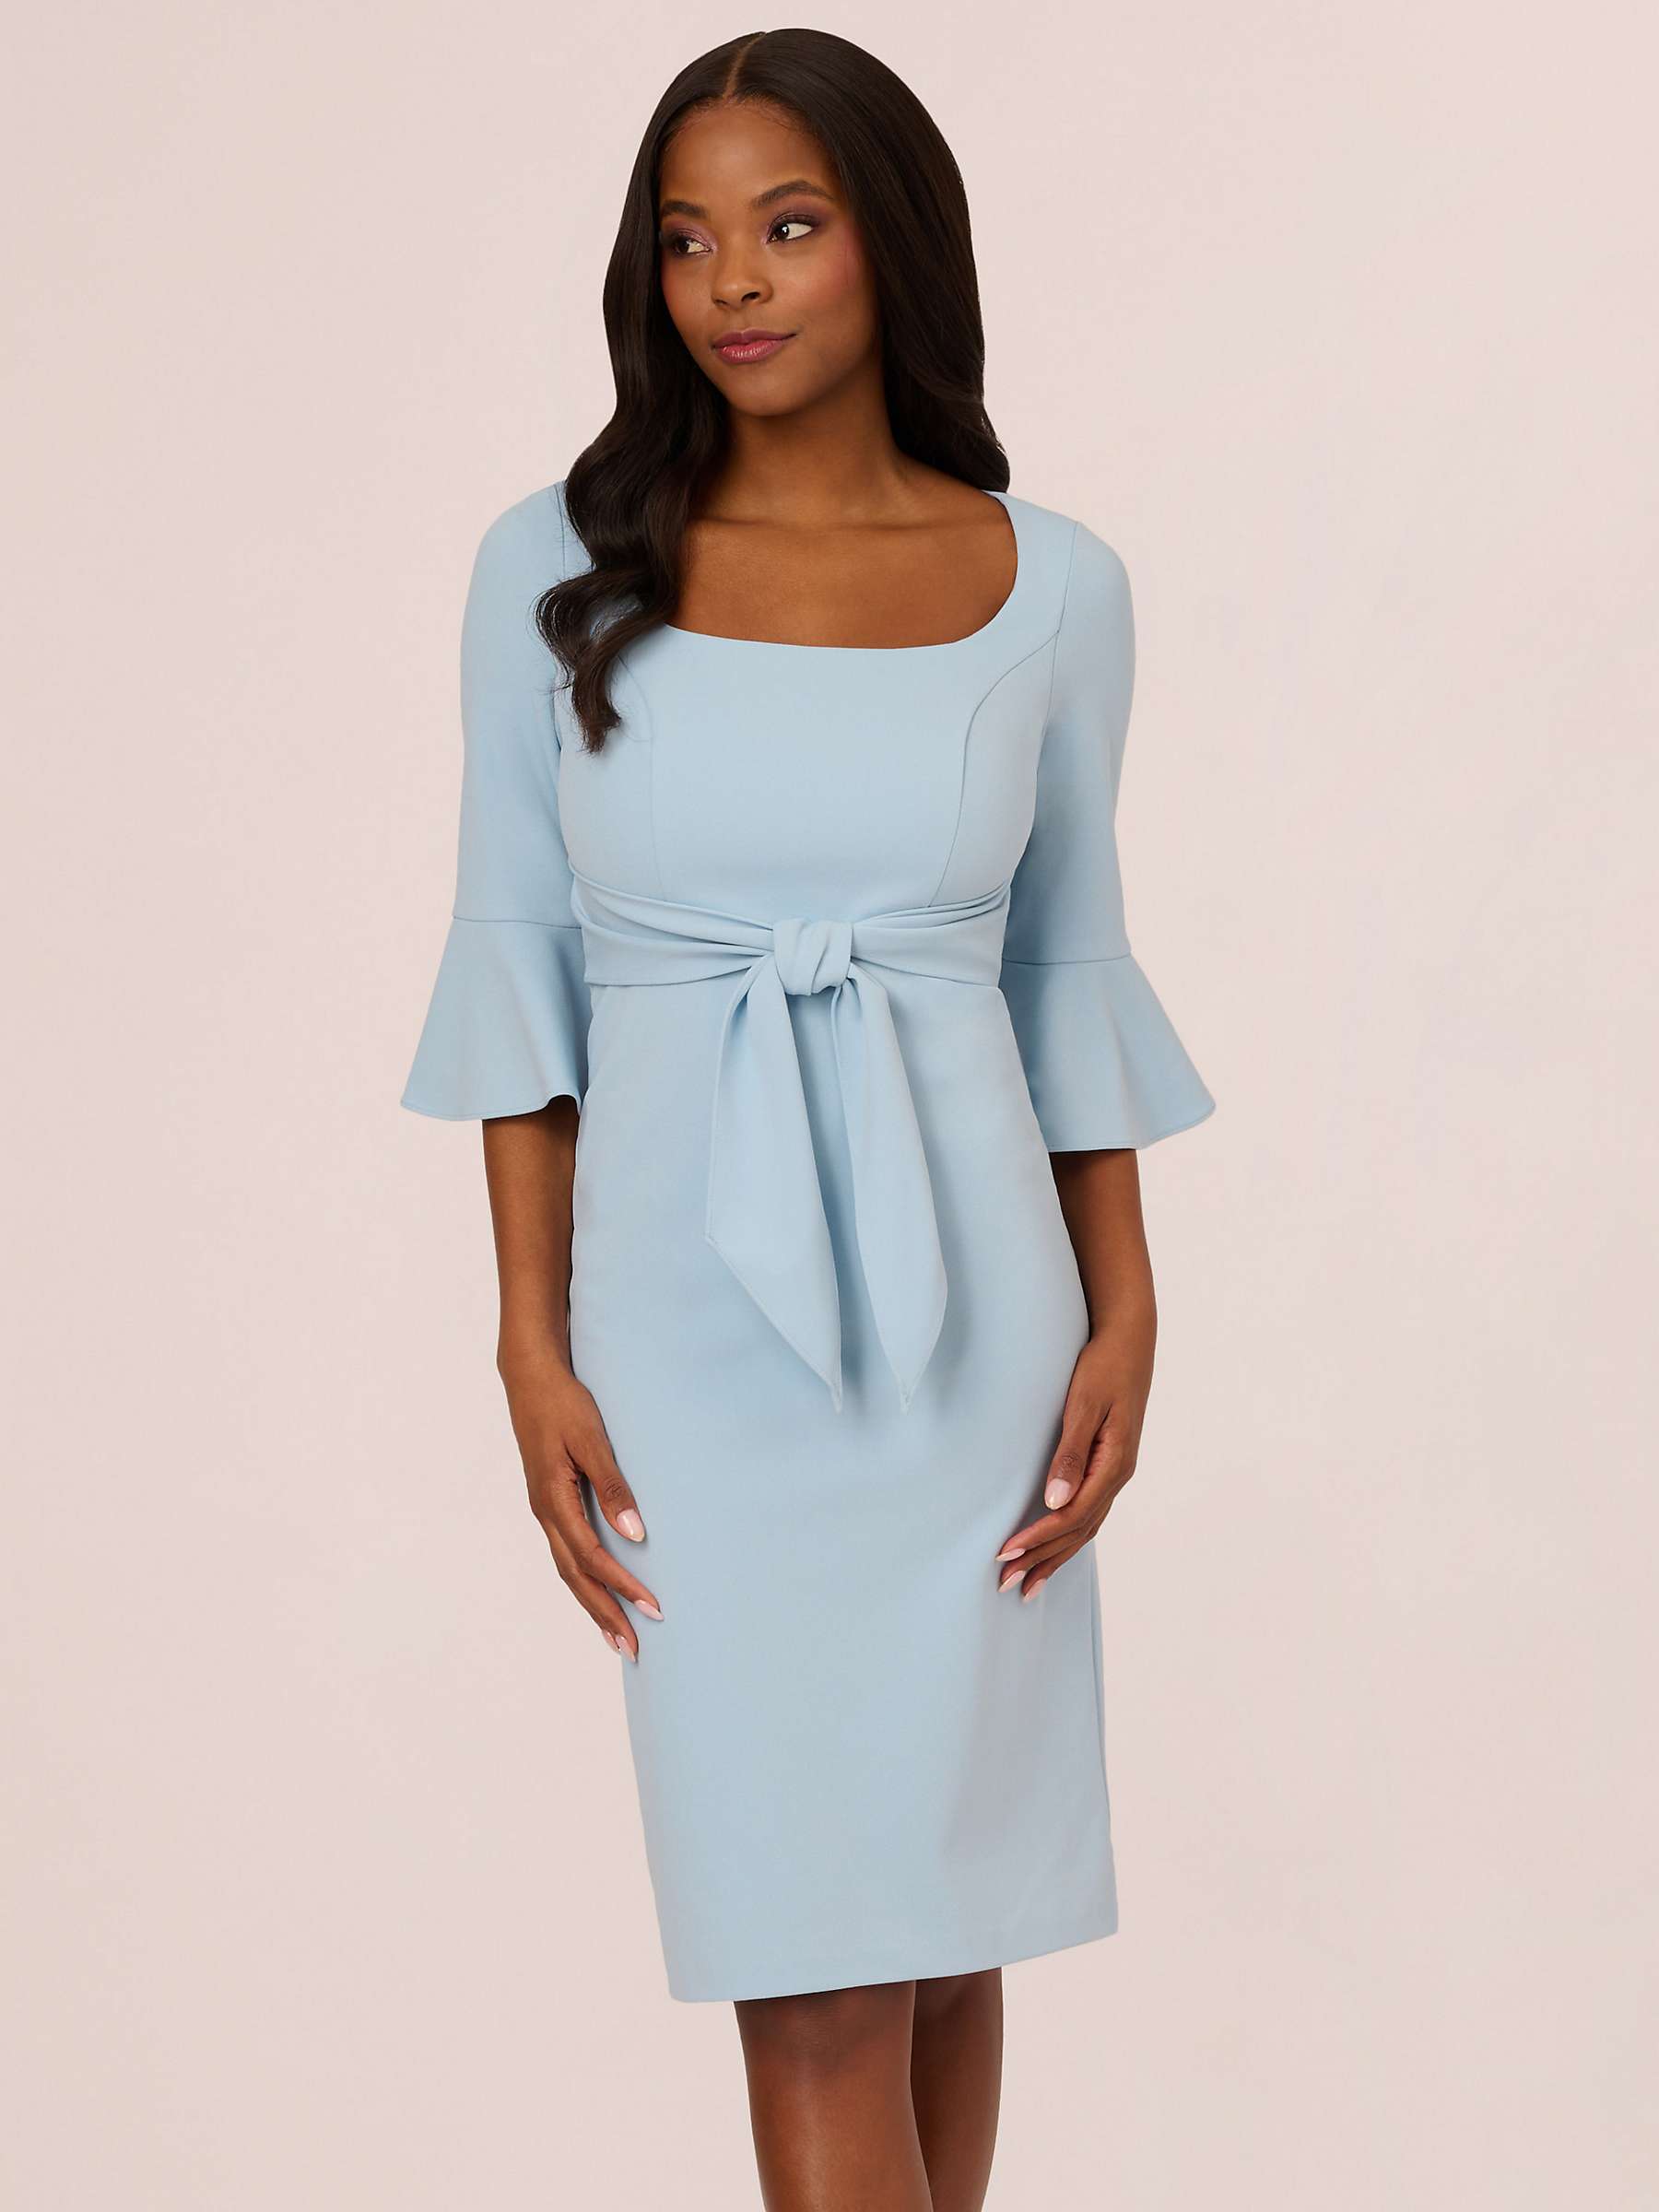 Buy Adrianna Papell Bell Sleeve Tie Front Midi Dress Online at johnlewis.com